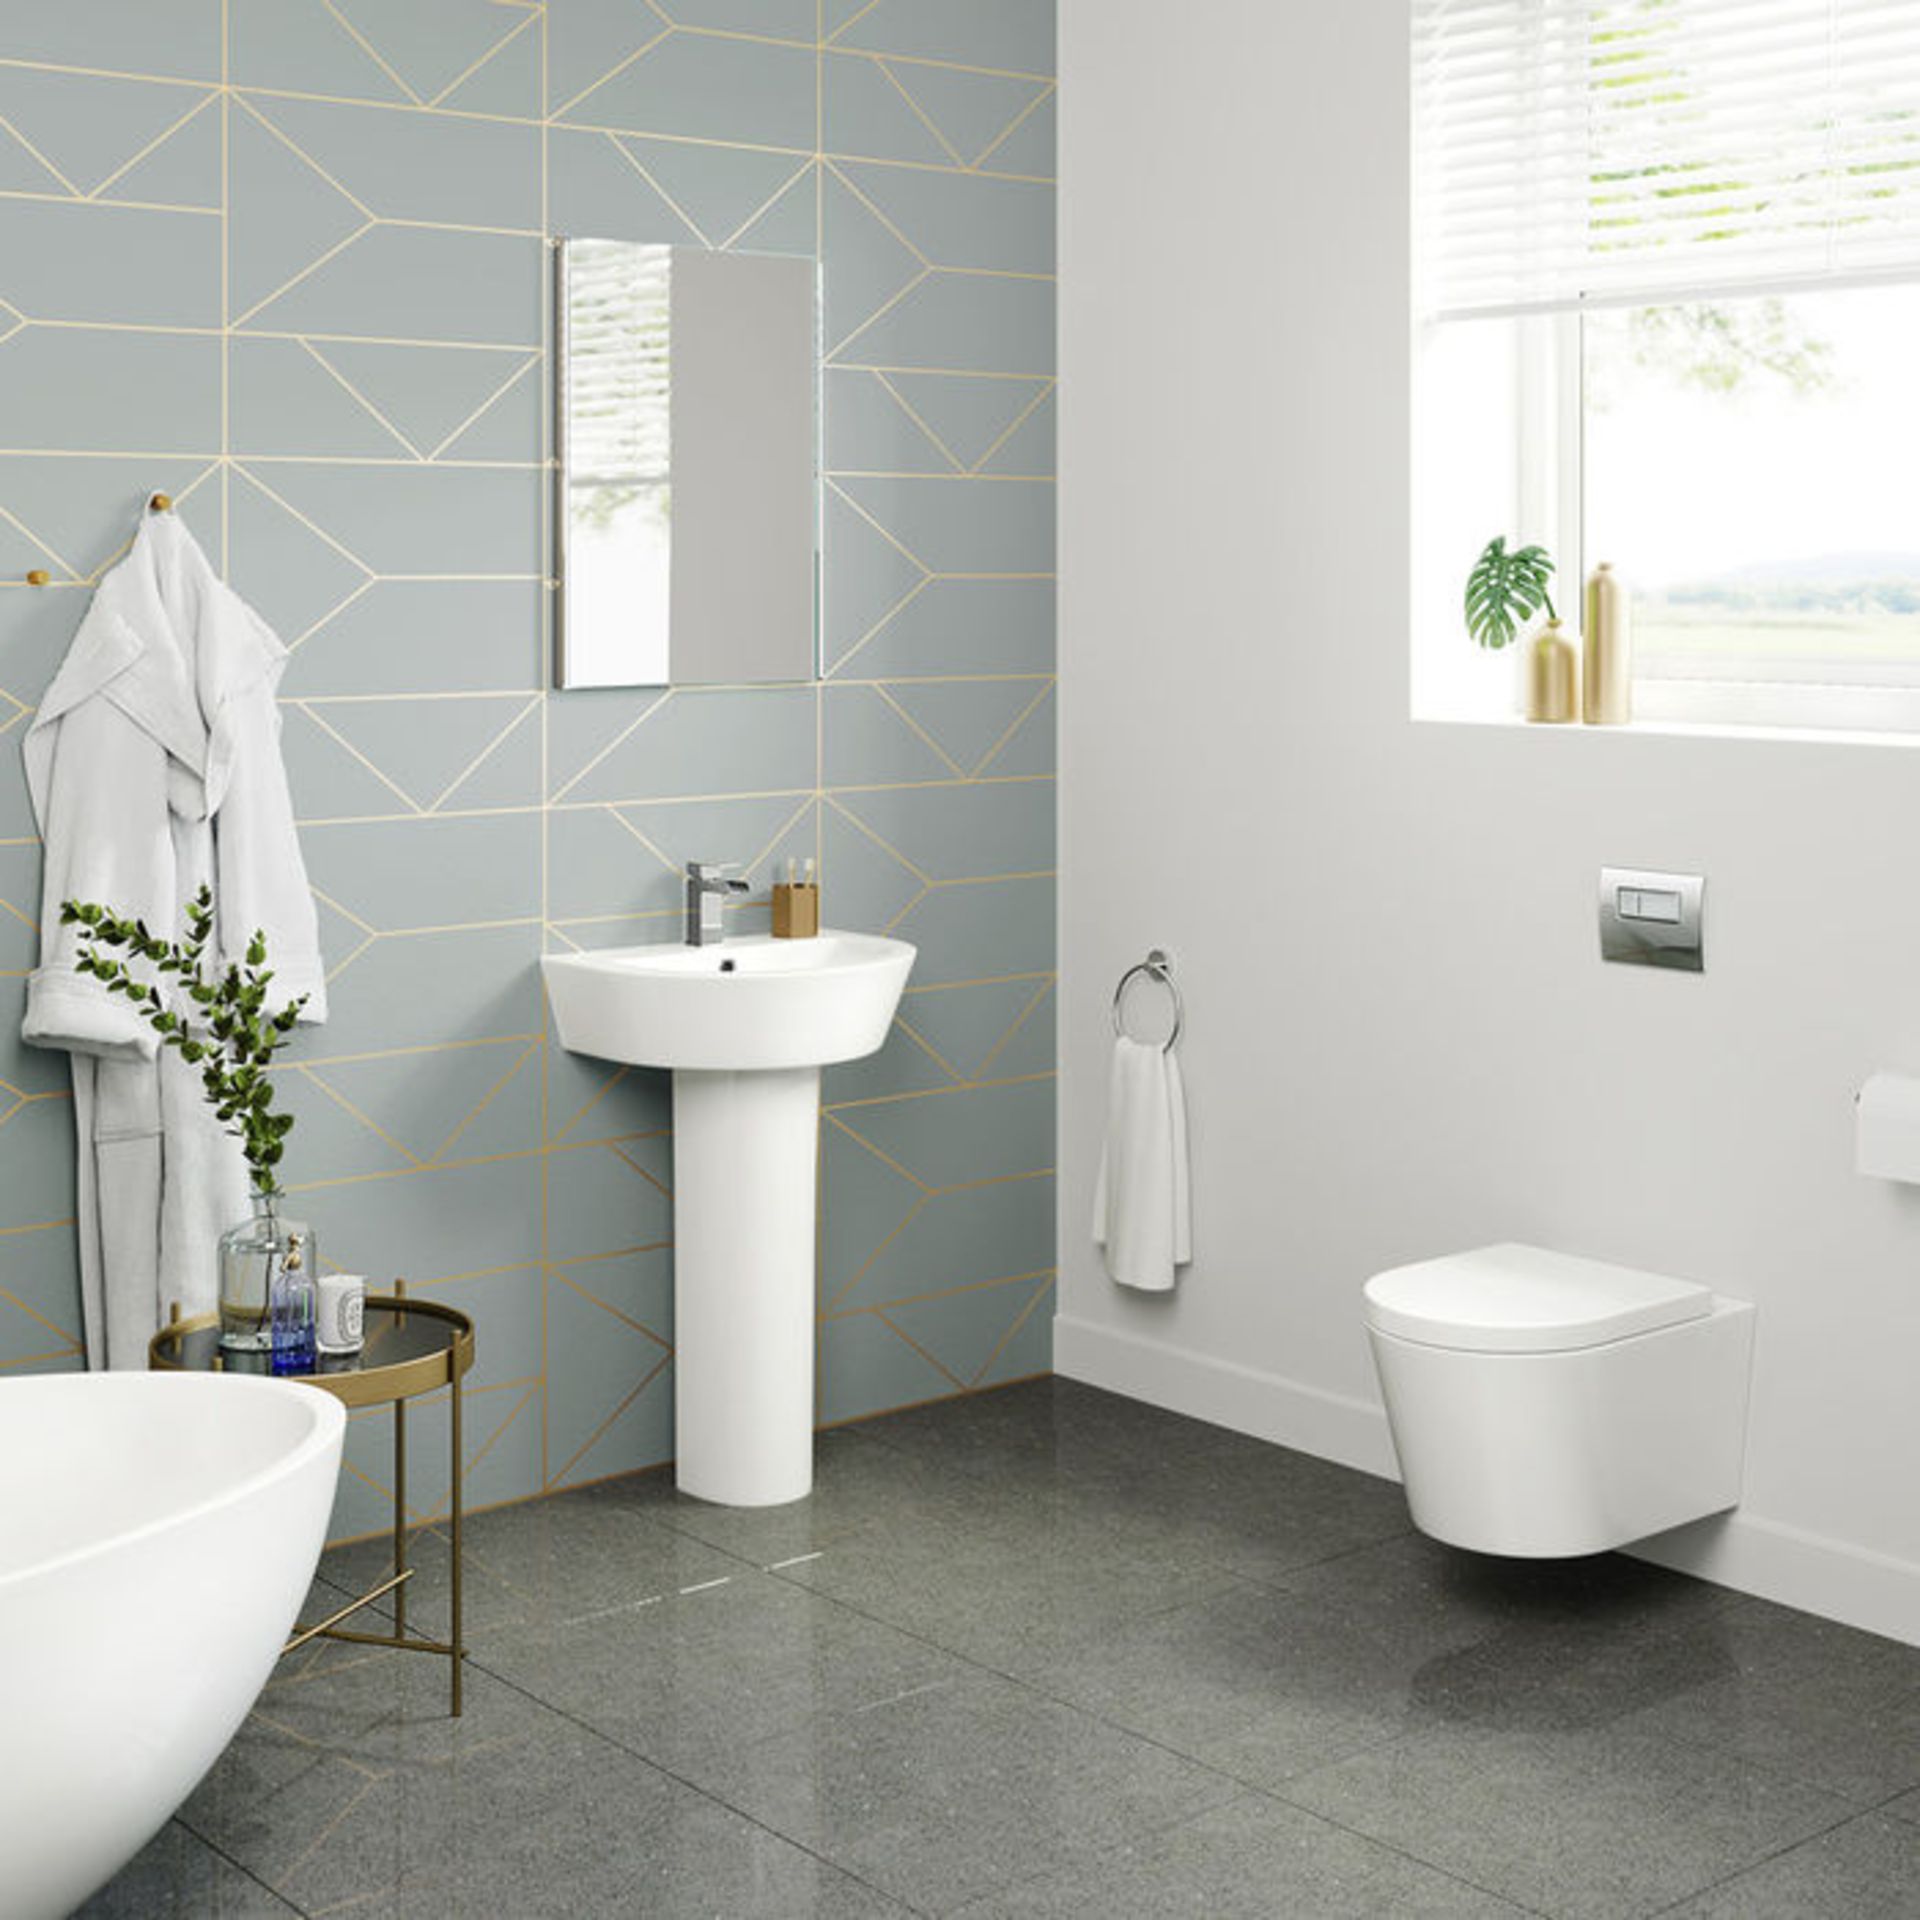 Brand New Lyon II Wall Hung Toilet inc Luxury Soft Close Seat We love this because wall hung toilets - Image 2 of 3